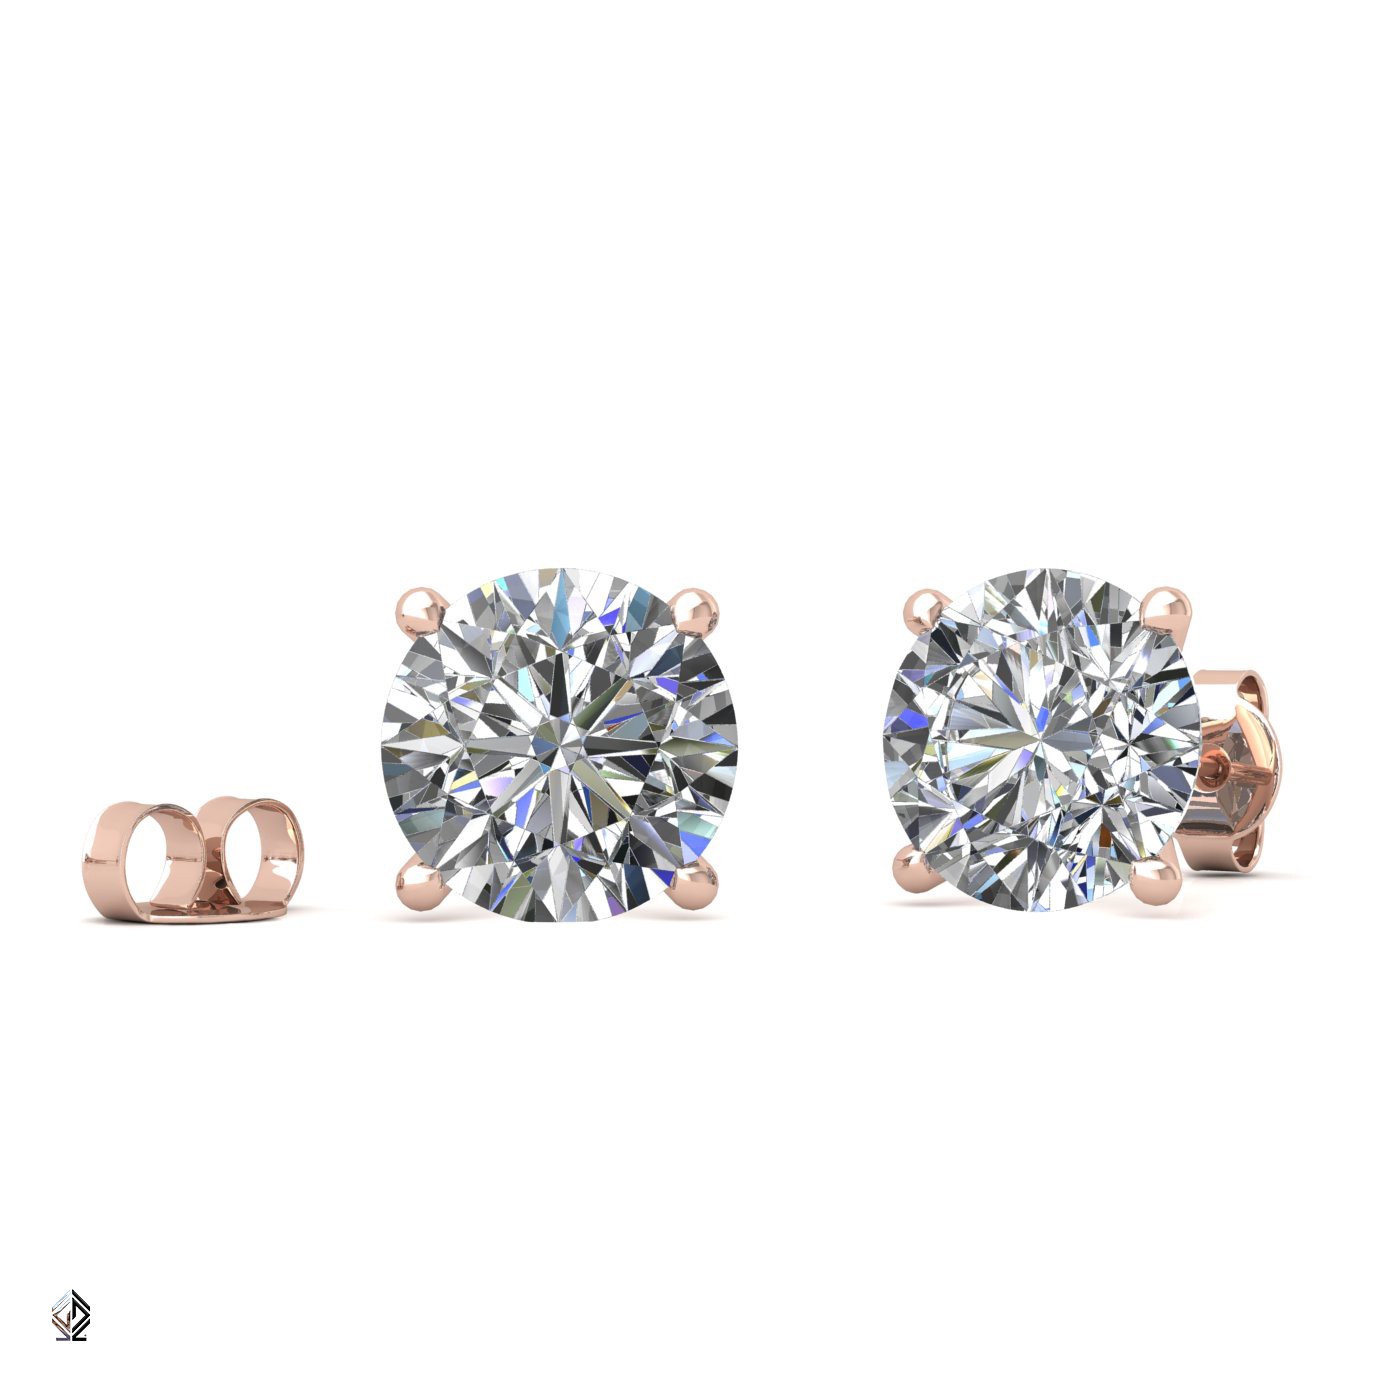 18k white gold 2.5 ct each (5,0 tcw) 4 prongs round cut classic diamond earring studs Photos & images